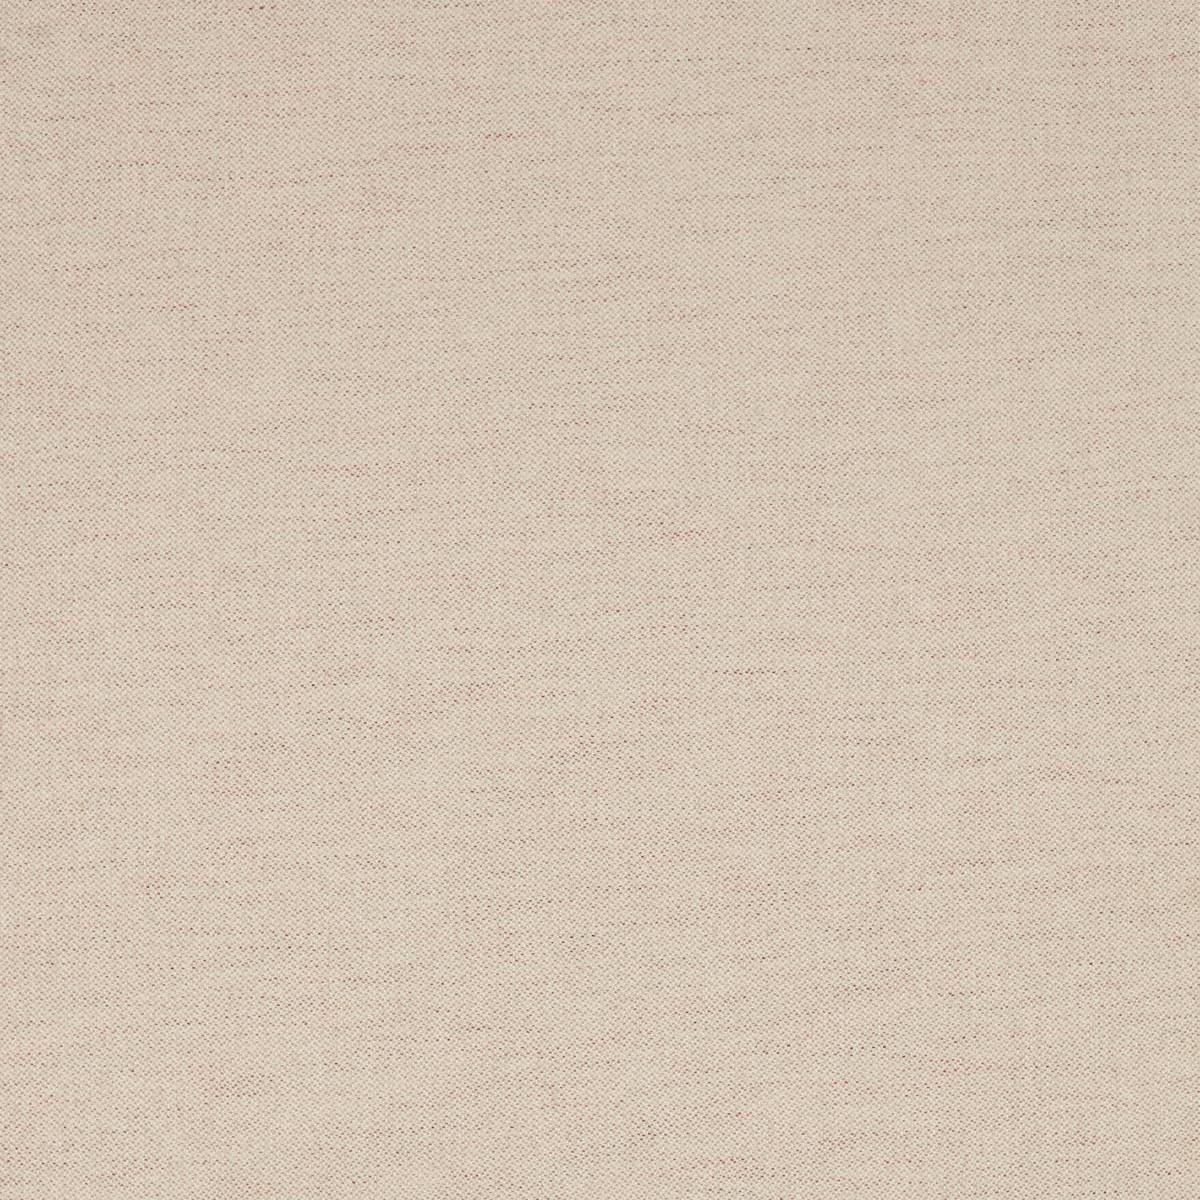 Curlew Claret/Natural Fabric by Sanderson